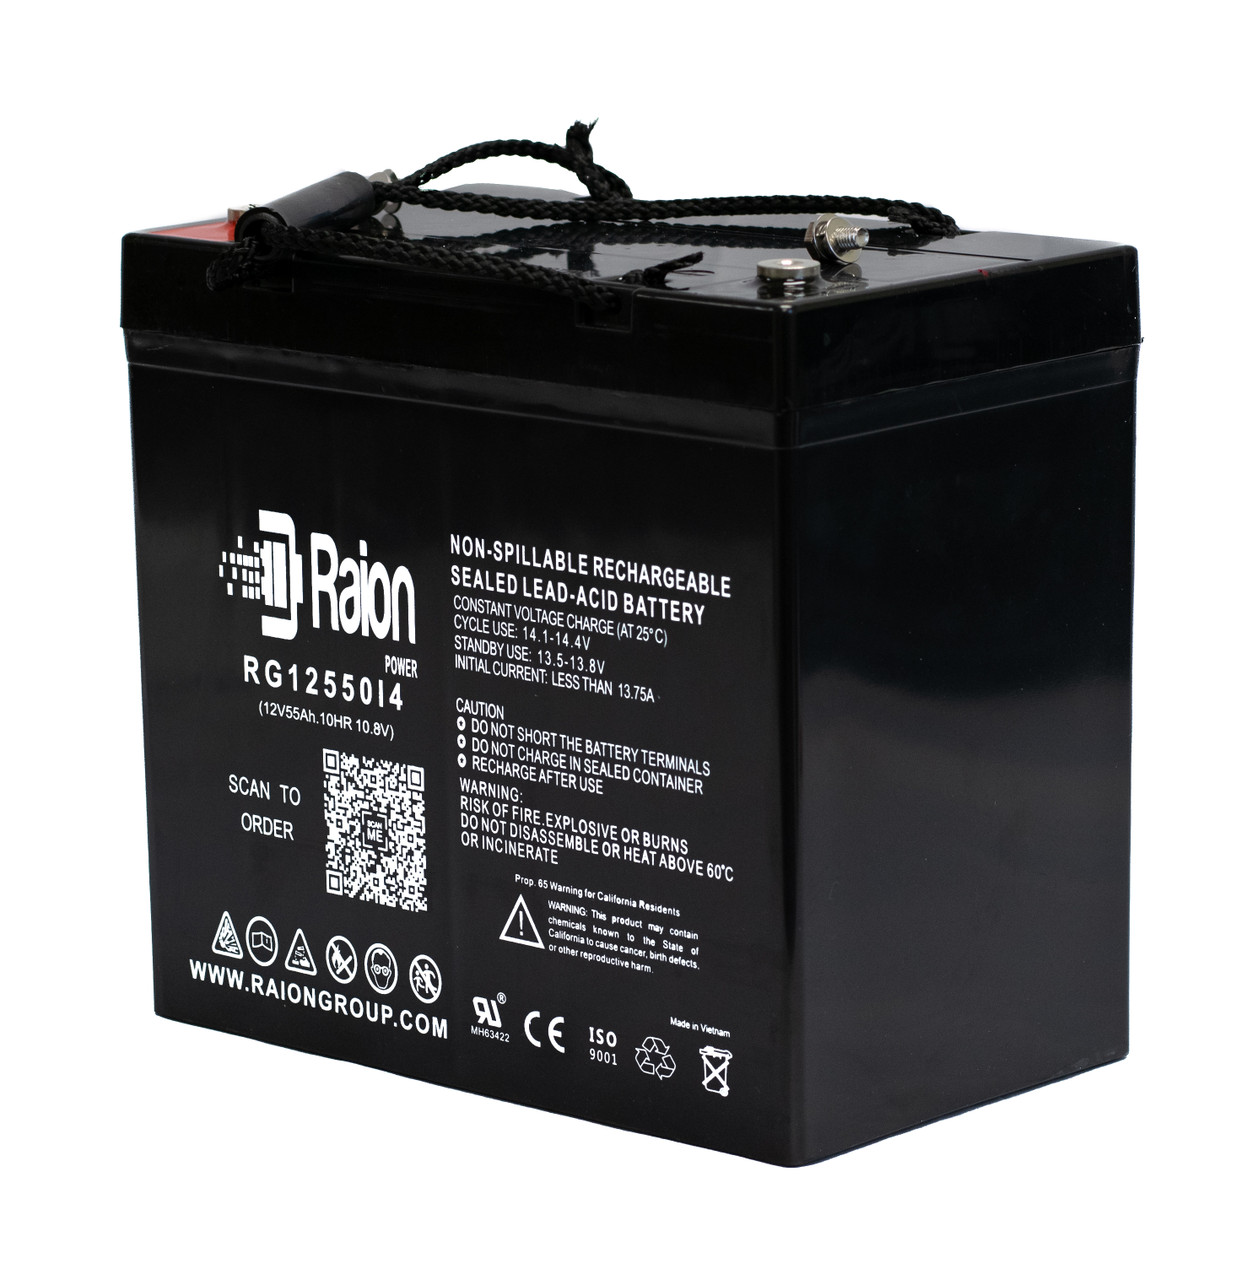 Raion Power 12V 55Ah 22NF Mobility Scooter Battery Replacement for Hoveround Teknique GT